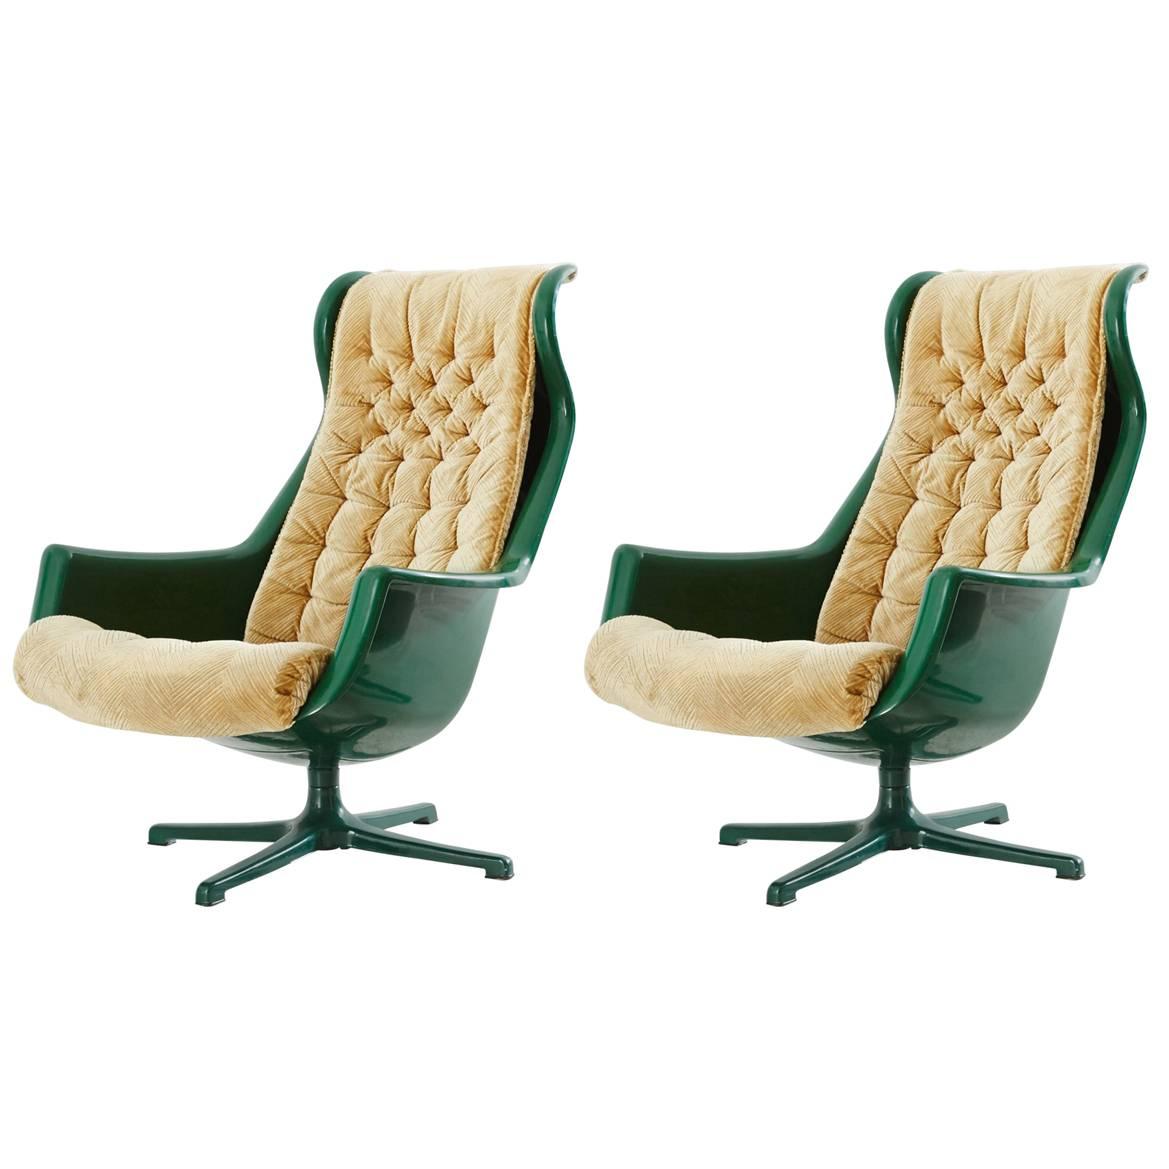 Rare Green and Gold Yngvar Sandström and Alf Svennson Galaxy Chairs